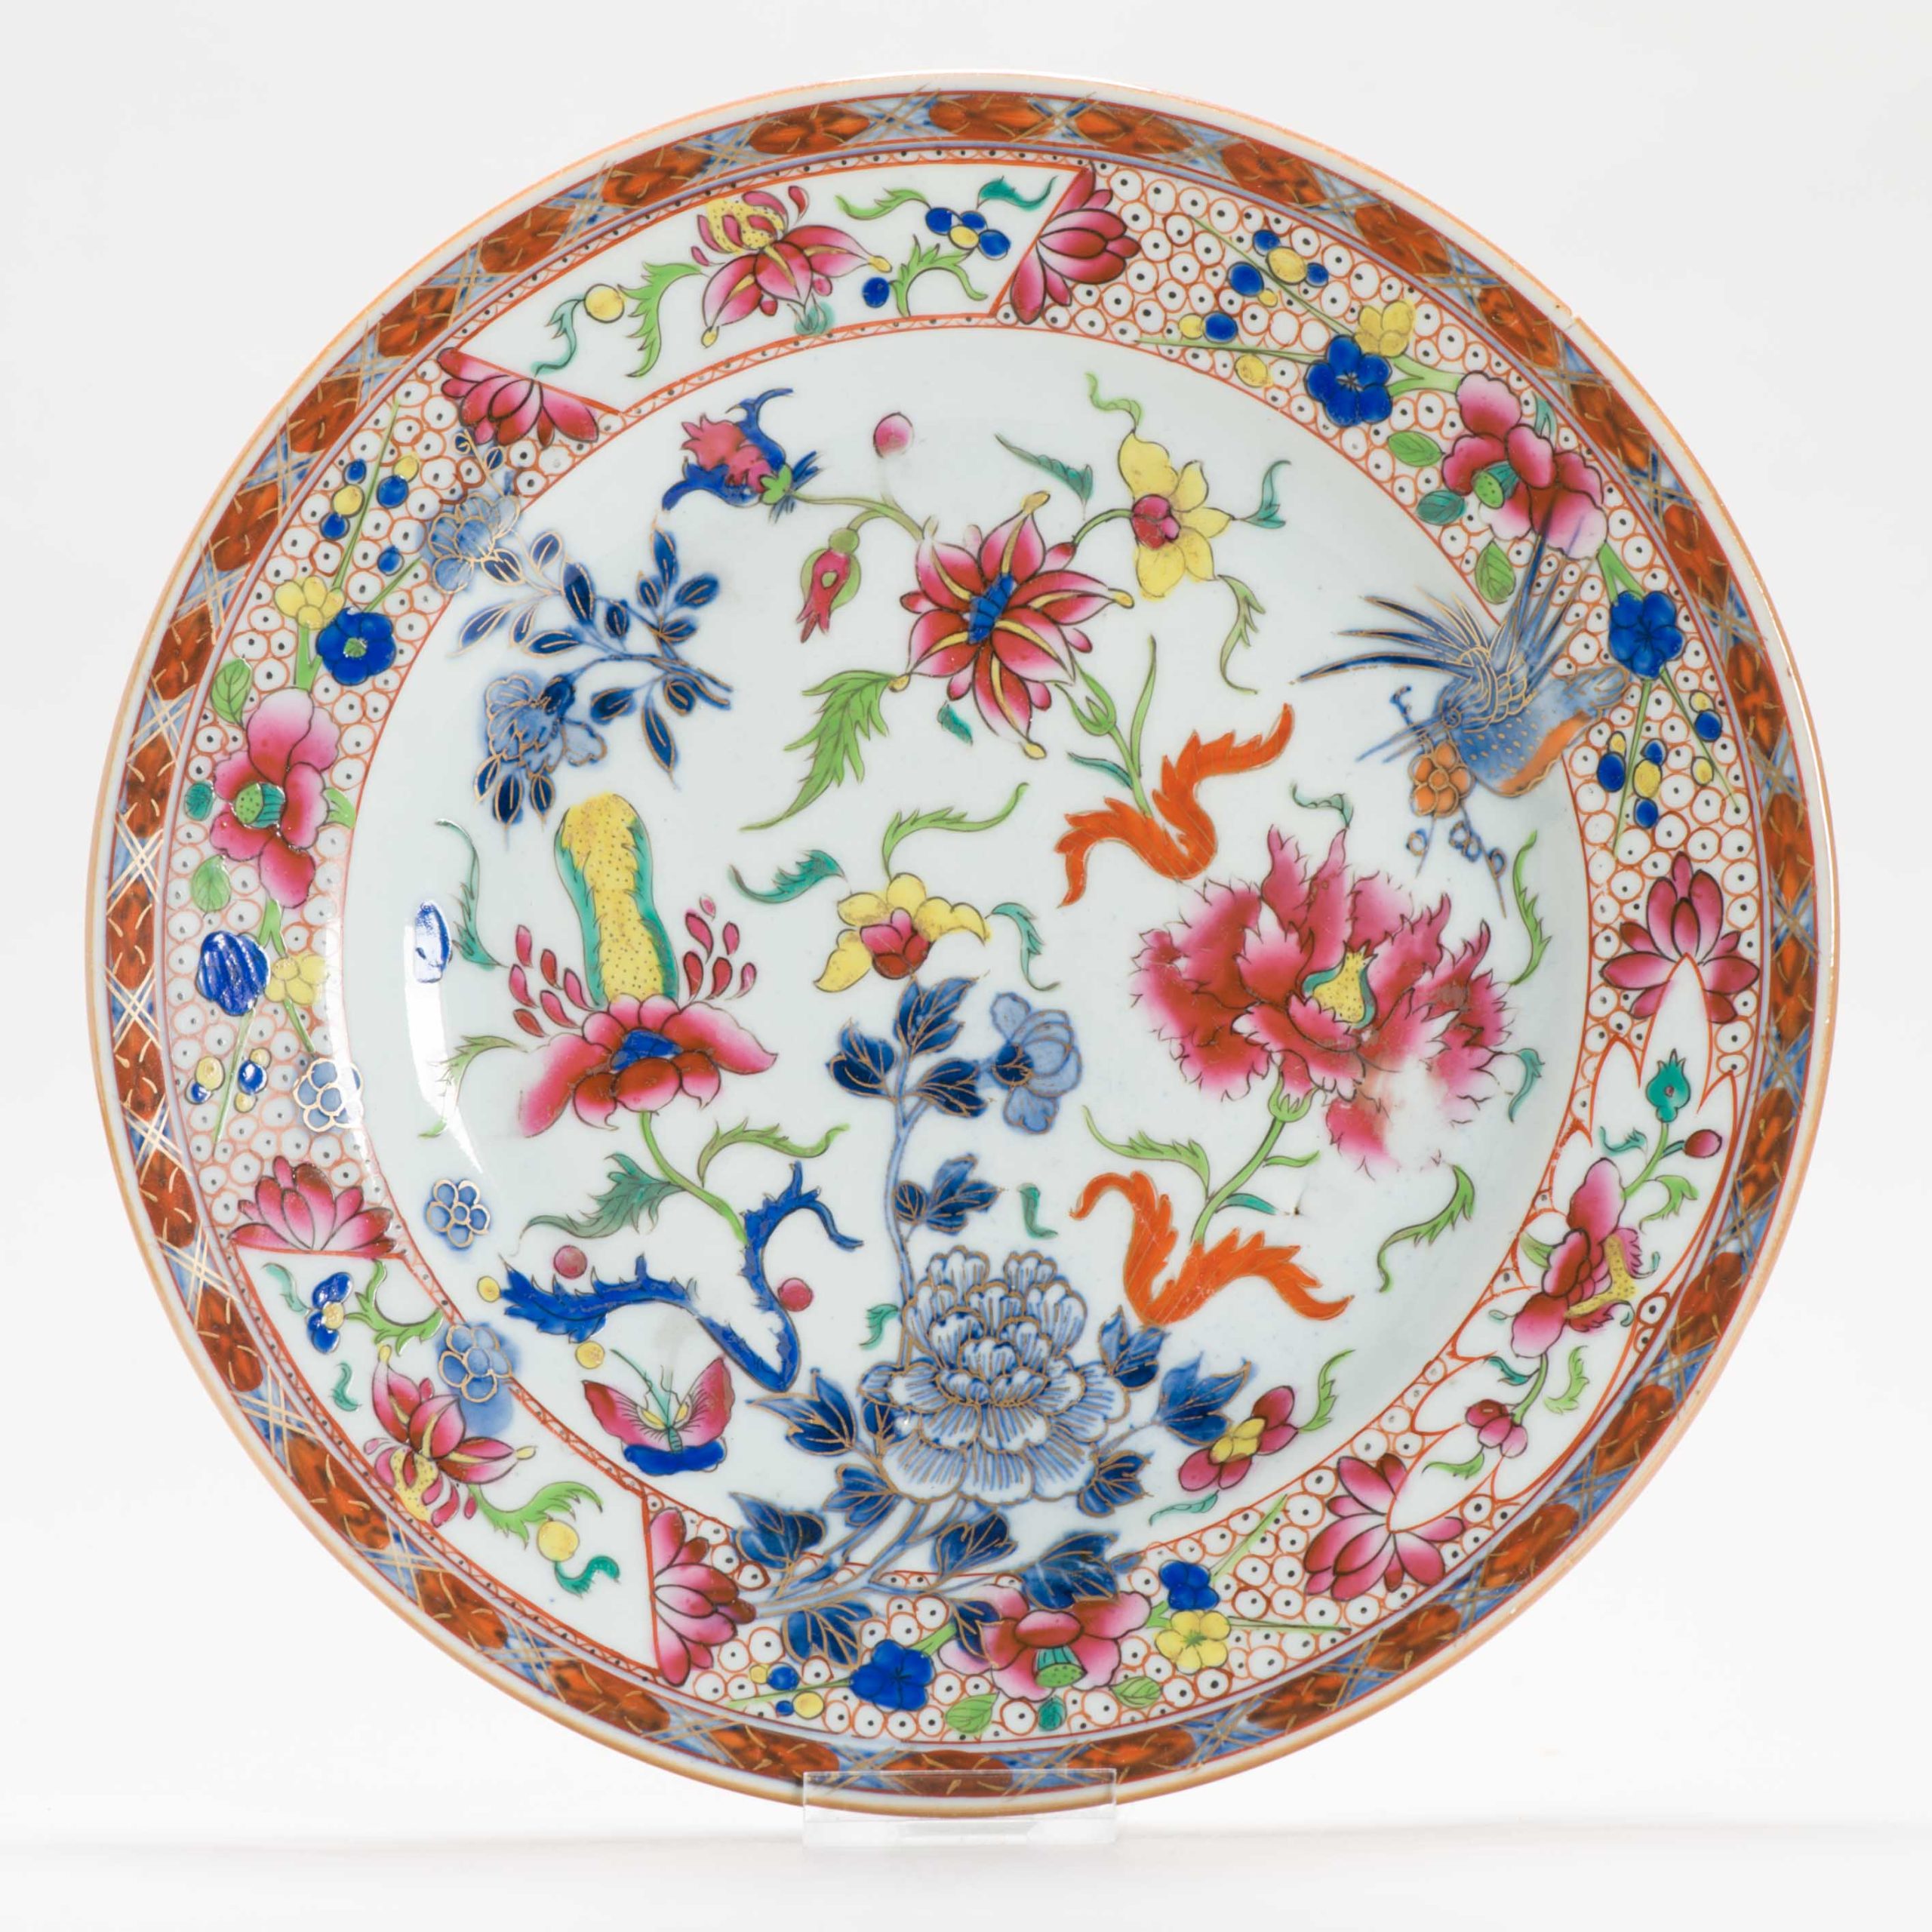 1286 Redecorated Qianlong Plate with overglaze European Decoration